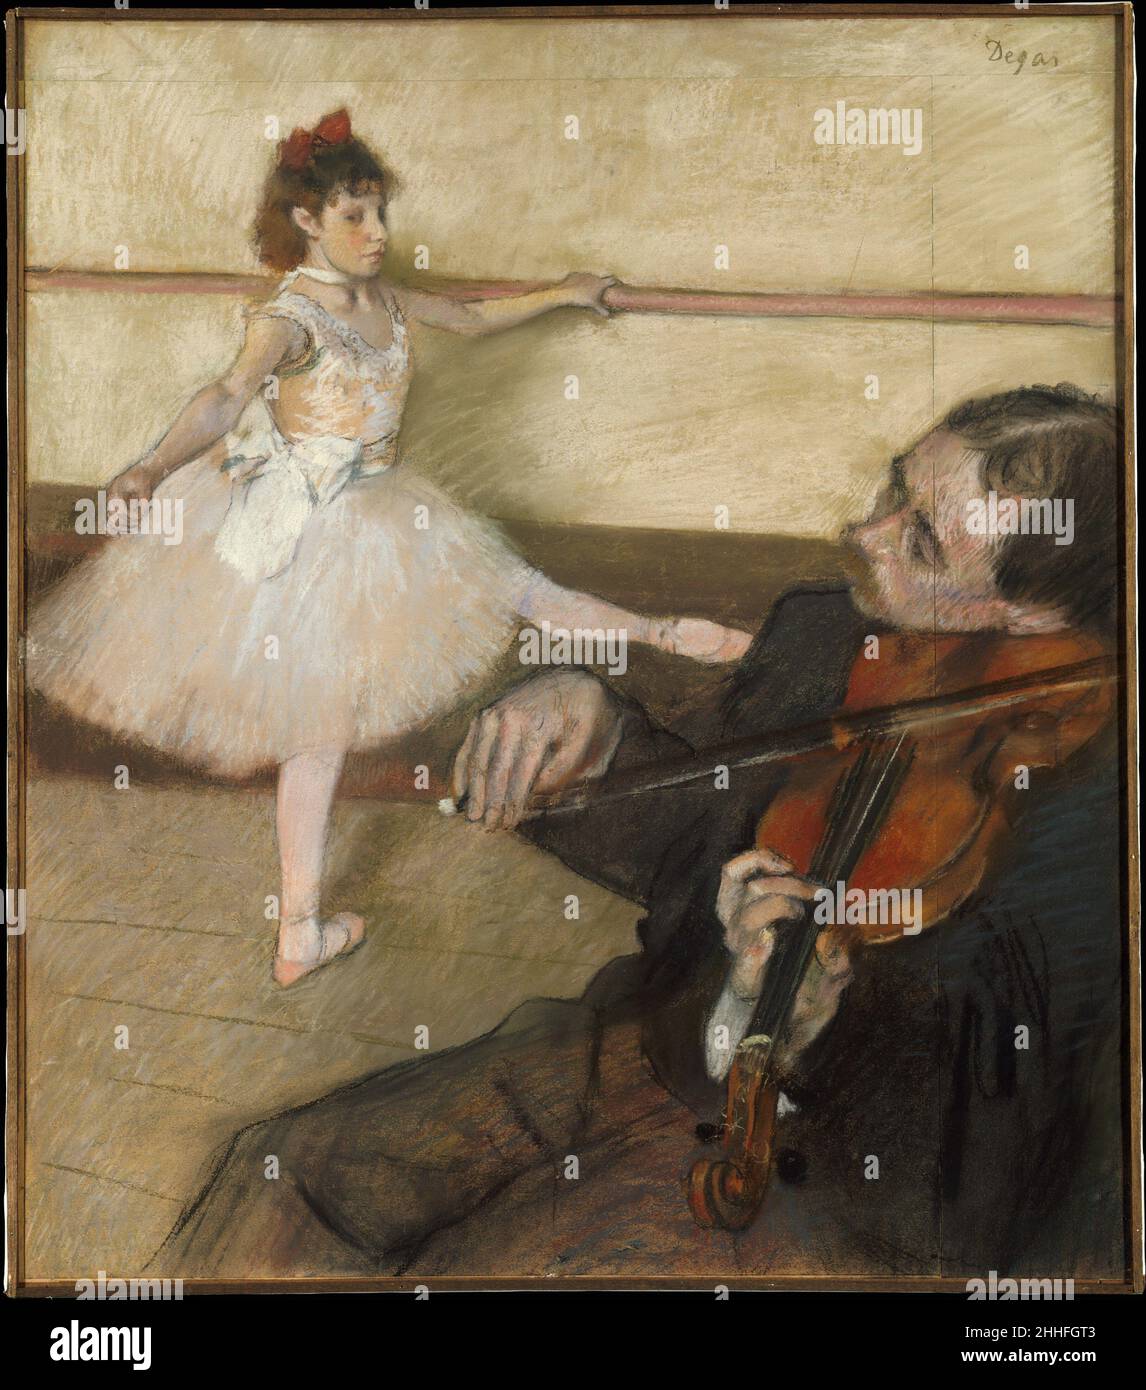 The Dance Lesson ca. 1879 Edgar Degas French Degas made various adjustments to this composition, presumably to accommodate the violinist in his final design. He added strips of paper at the top and to the right, and there is evidence to suggest that he may have altered the dancer's pose. A pastel study for the musician is in the Museum's collection (19.51.1). The present work was formerly owned by Gustave Caillebotte, who probably bought it from or soon after the Impressionist exhibition of 1879. In 1894 he bequeathed it to Renoir, who sold it shortly thereafter. Buy a print Custom framed to s Stock Photo